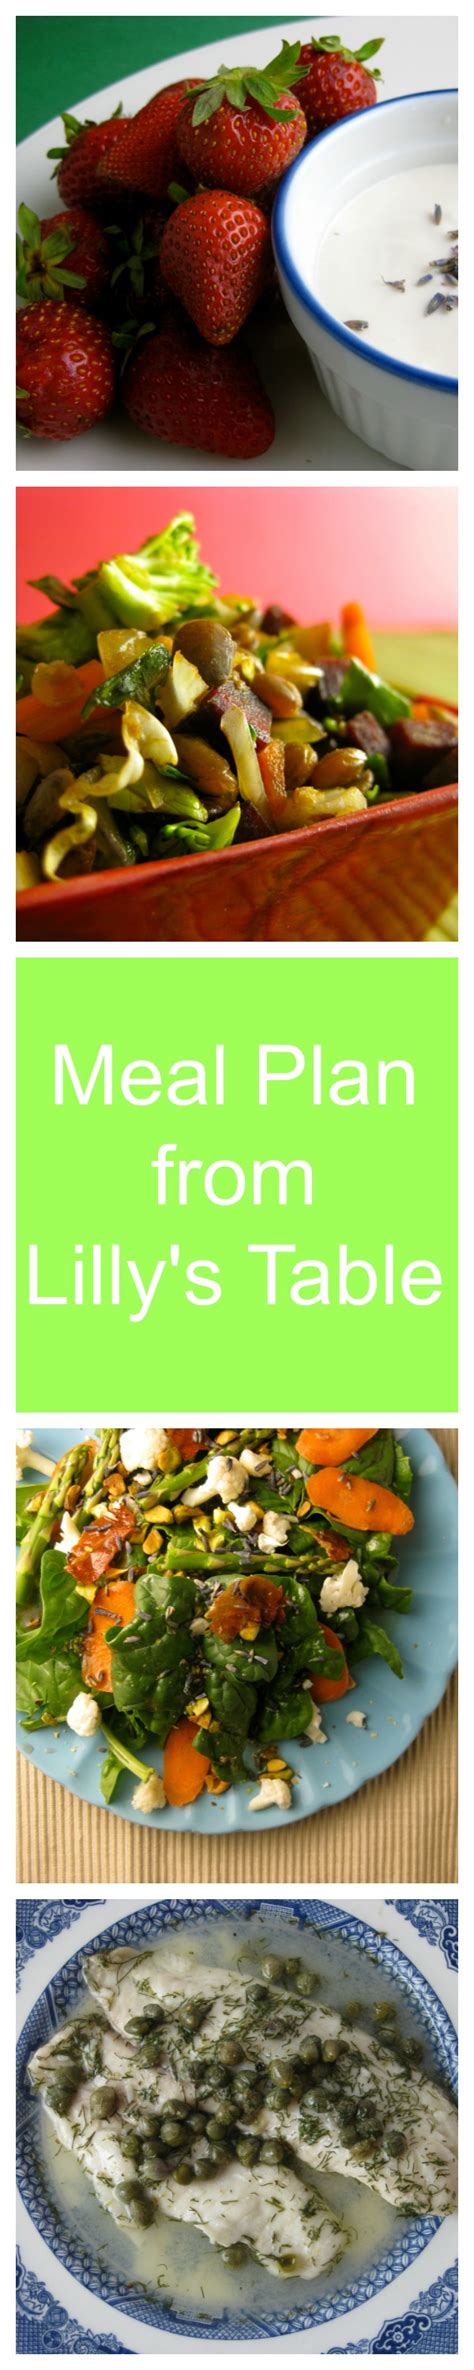 lilly s table spring meal plan features a lavender spring salad chopped vegetables lentils